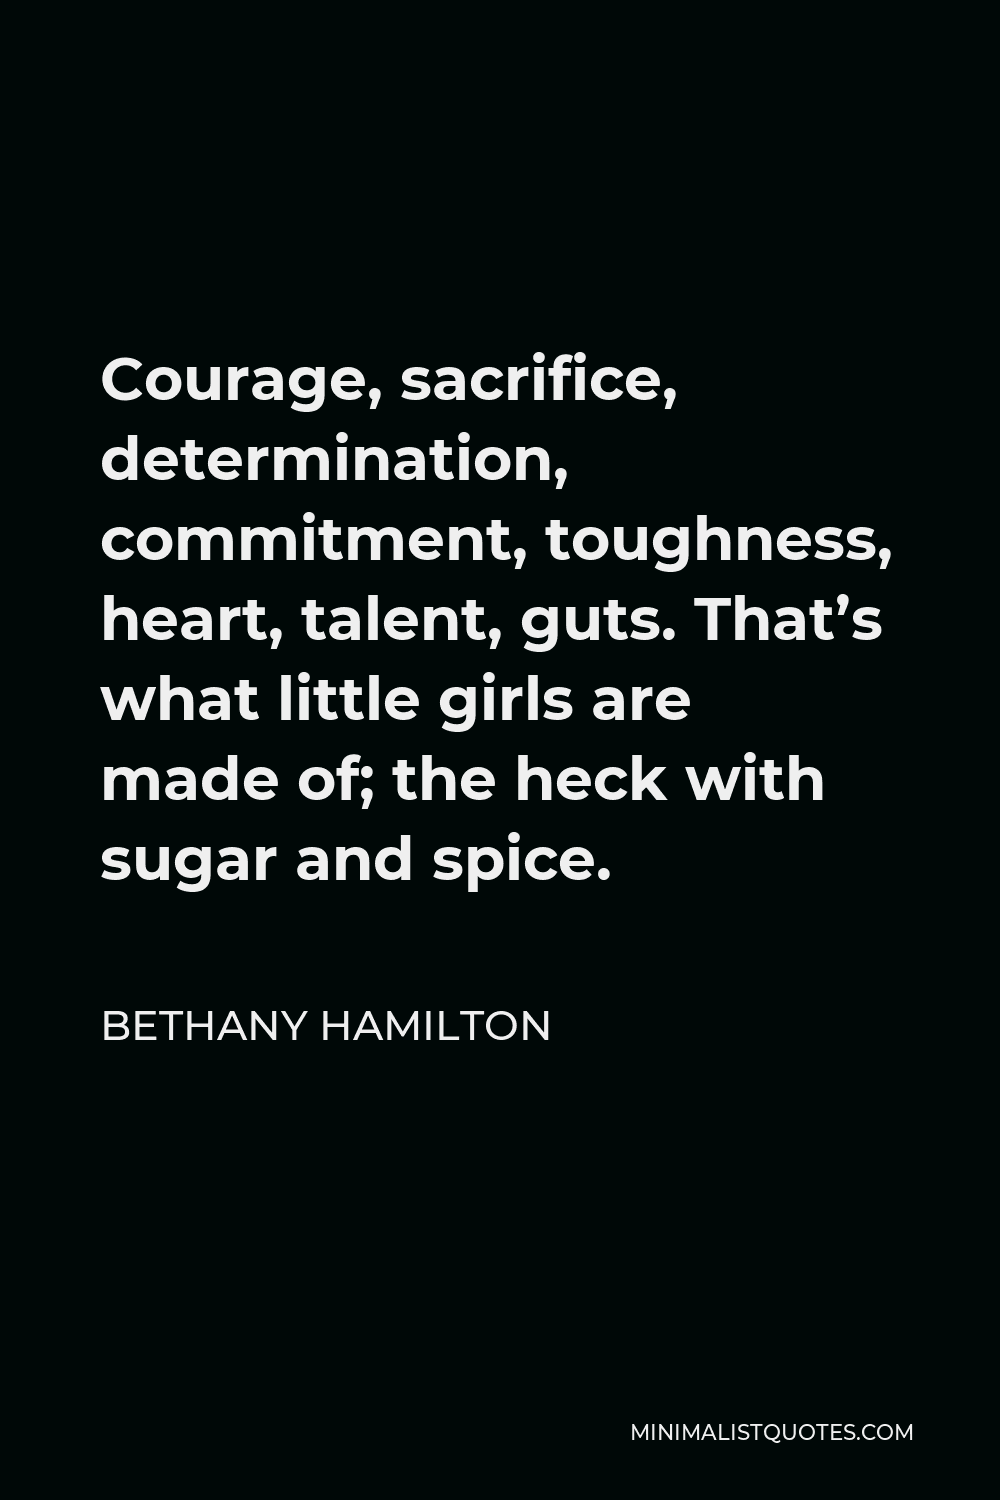 Bethany Hamilton Quote - Courage, sacrifice, determination, commitment, toughness, heart, talent, guts. That’s what little girls are made of; the heck with sugar and spice.